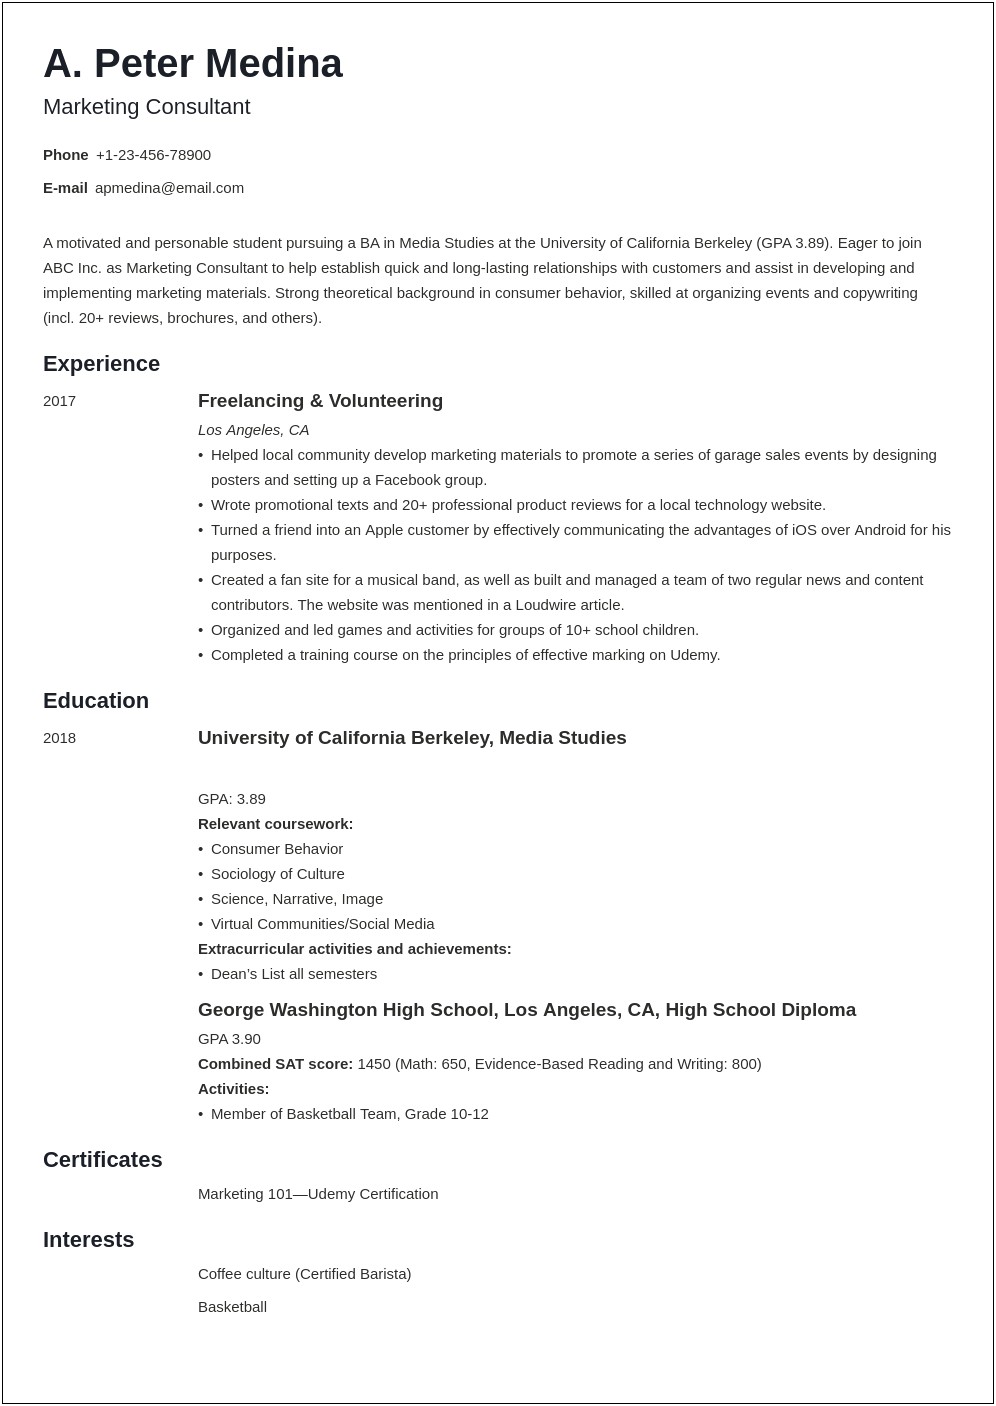 Resume Work Objective No Experience